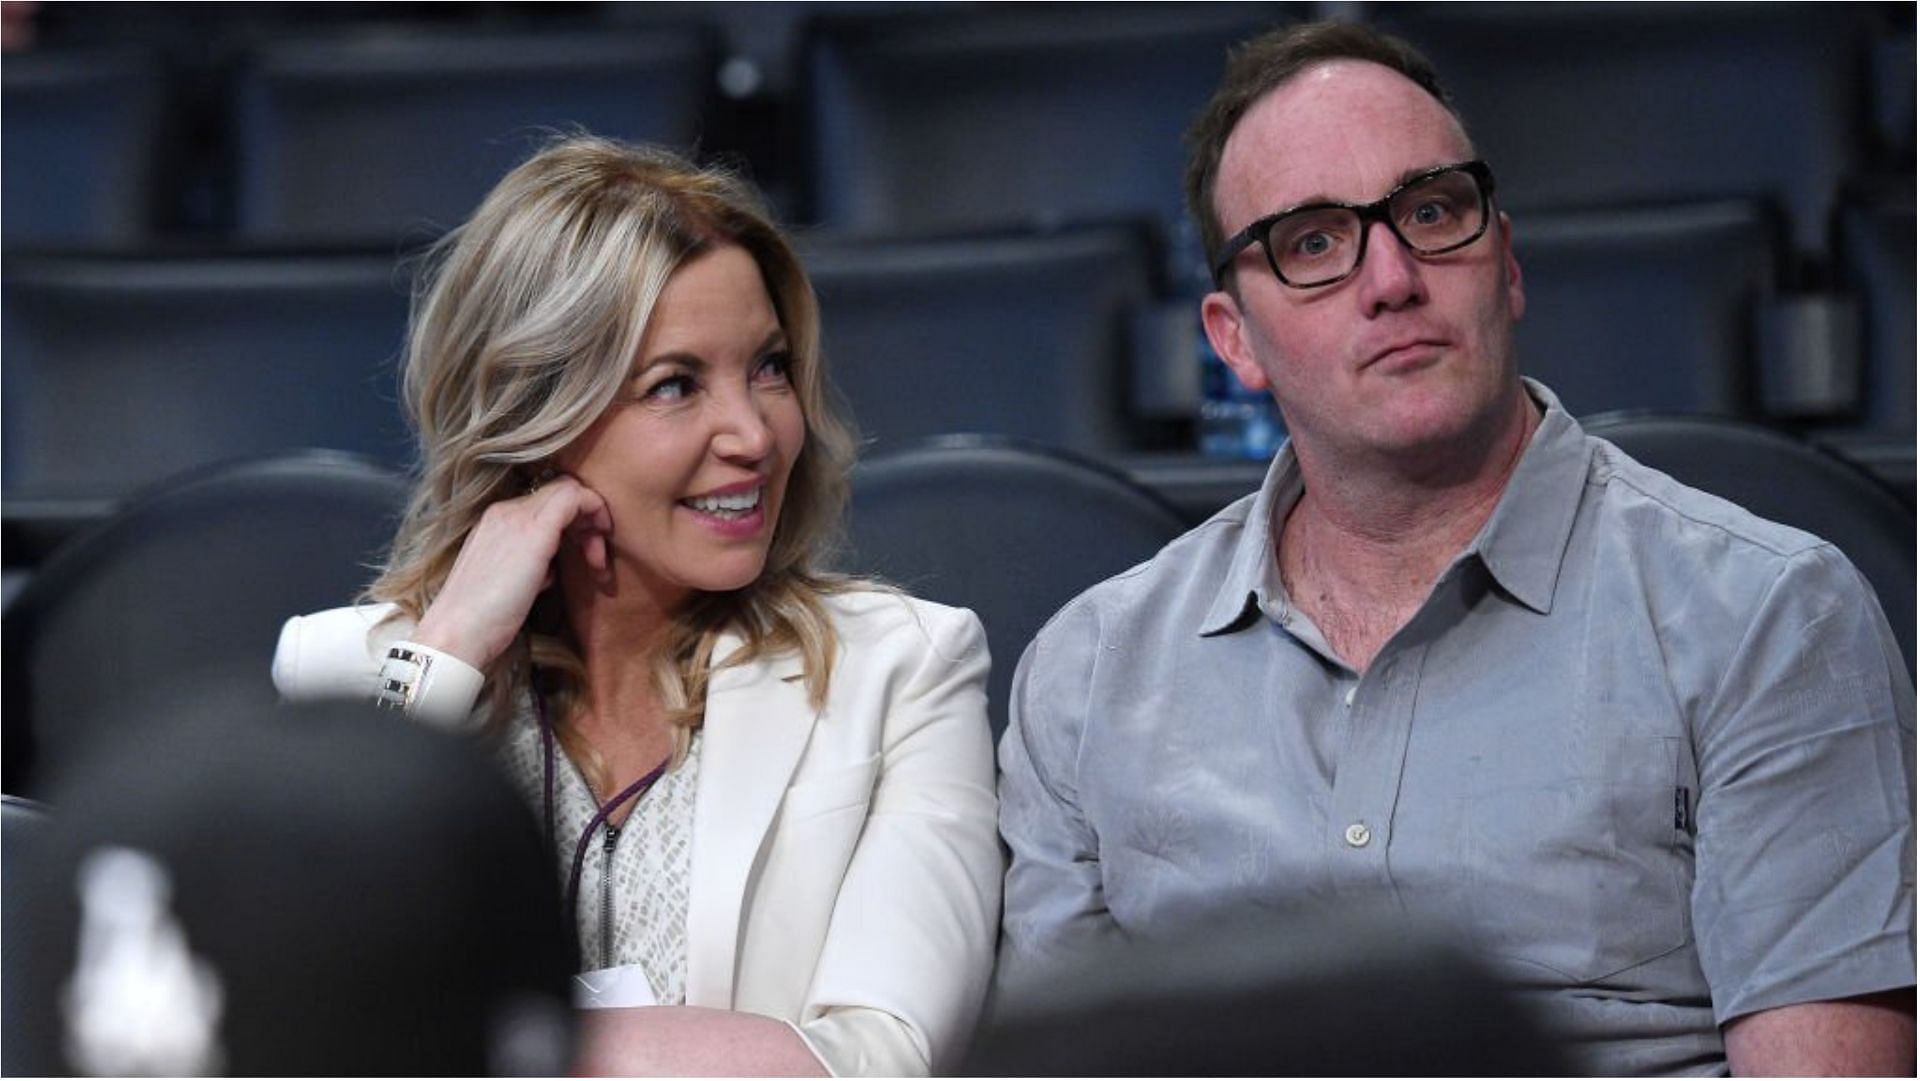 Jeanie Buss and Jay Mohr have accumulated a lot of wealth from their successful careers (Image via Kevork Djansezian/Getty Images)